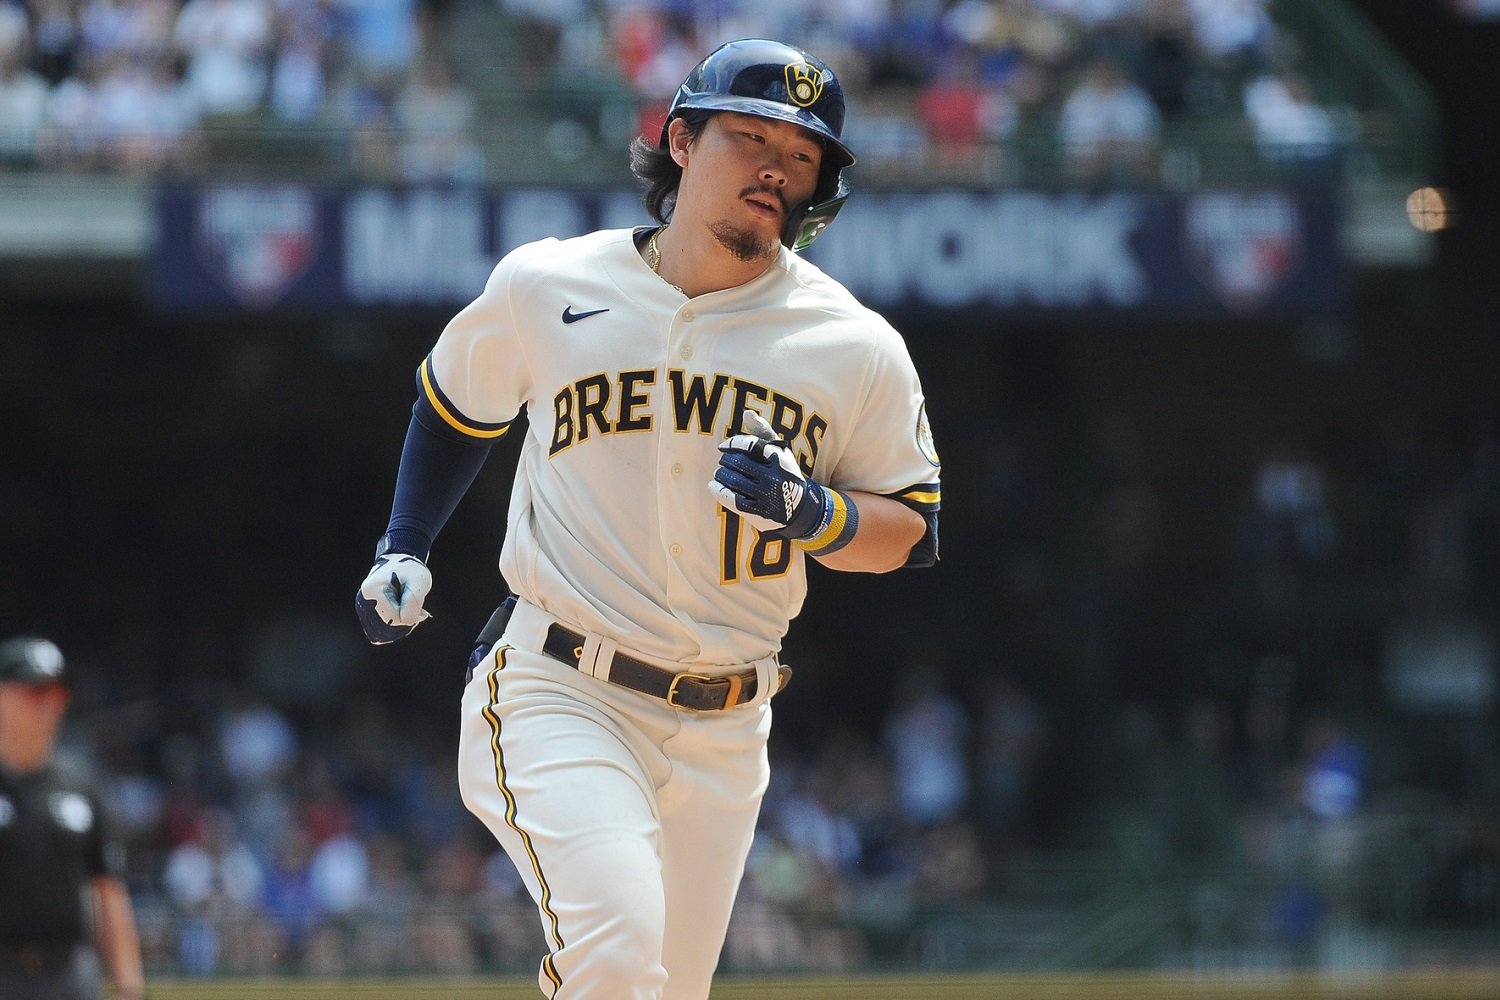 Why hasn't Keston Hiura been in the Milwaukee Brewers lineup more?